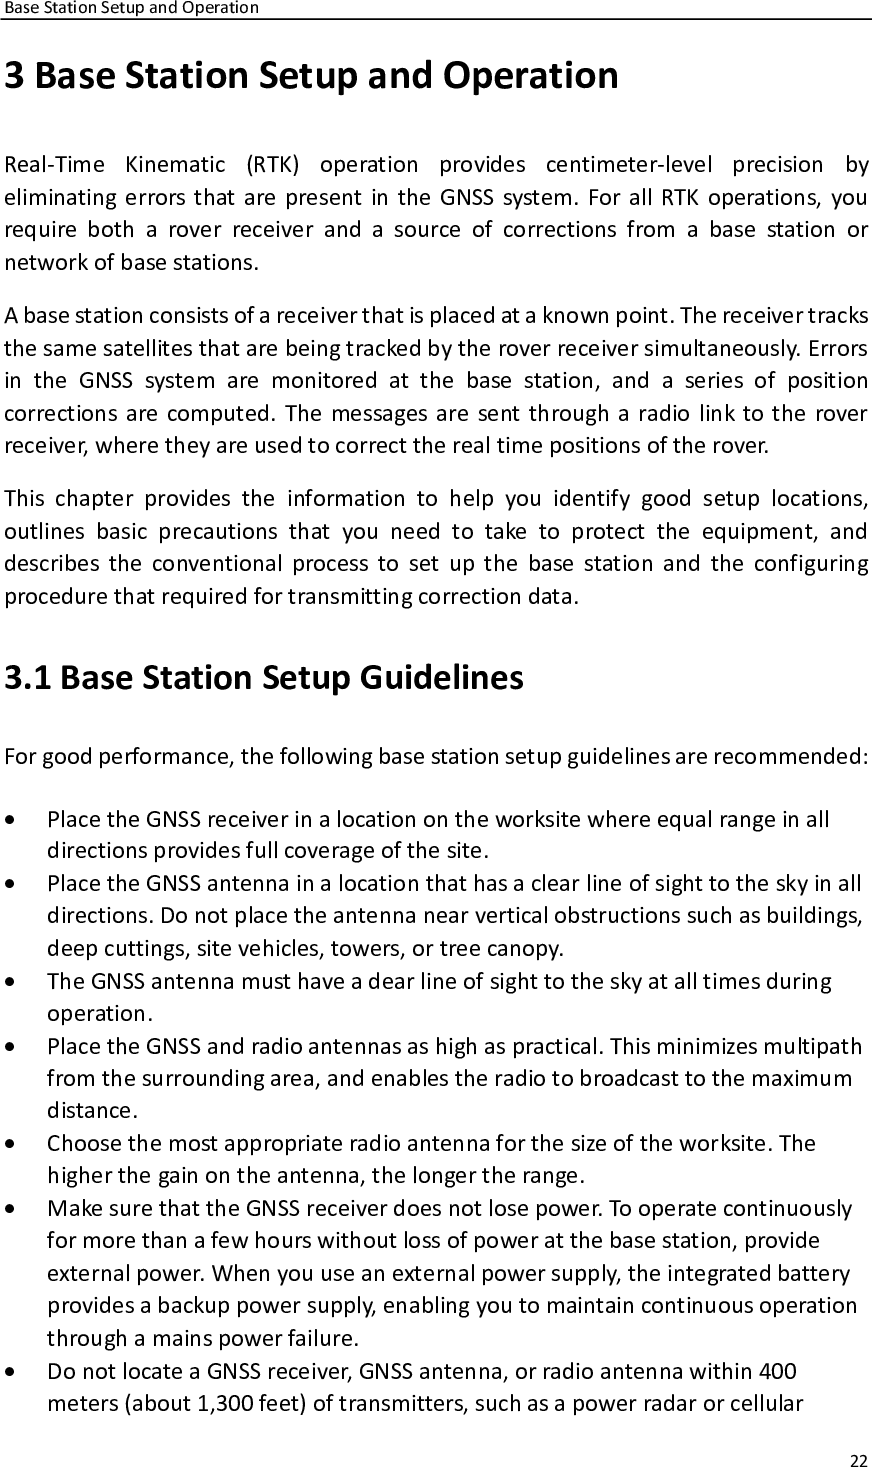 Page 22 of Huace Navigation Technology A01013 Geodetic GNSS Receiver E91 User Manual User manual